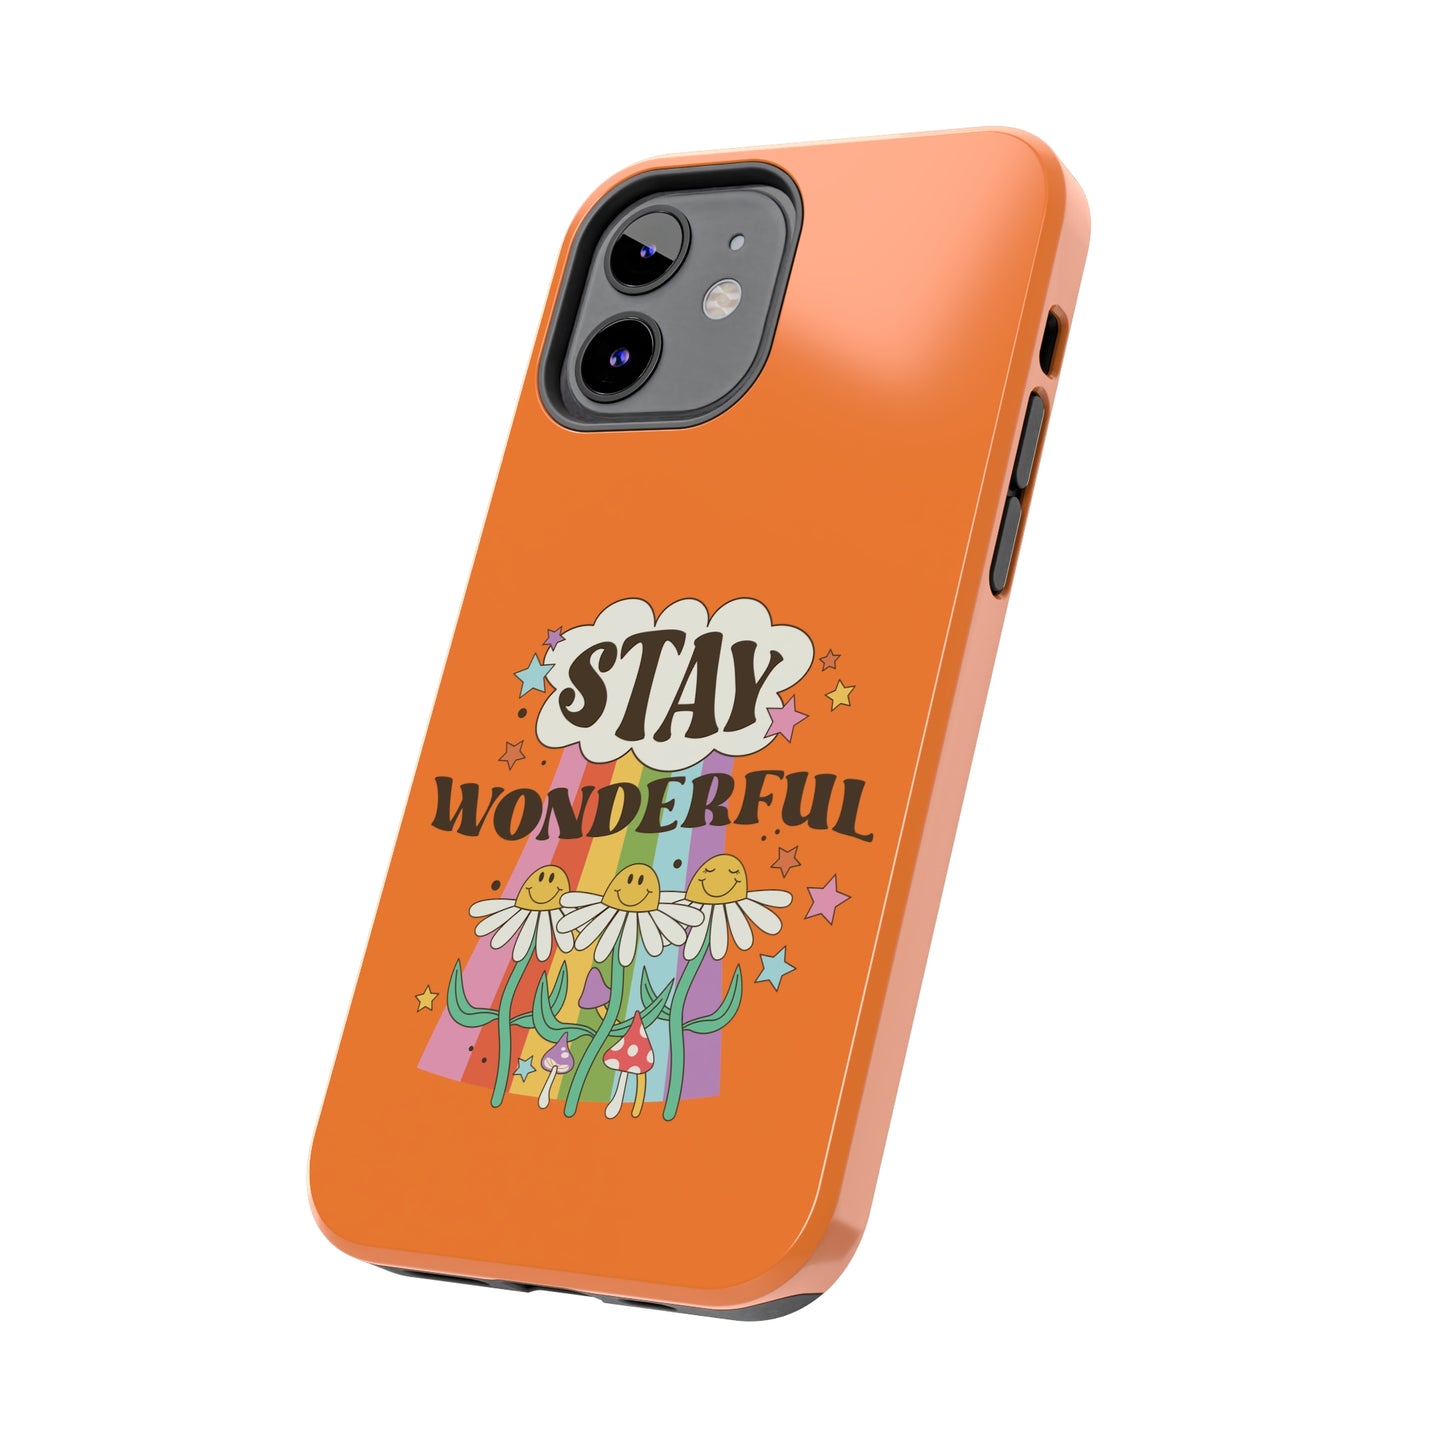 Stay Wonderful Daisies: iPhone Tough Case Design - Wireless Charging - Superior Protection - Original Designs by TheGlassyLass.com